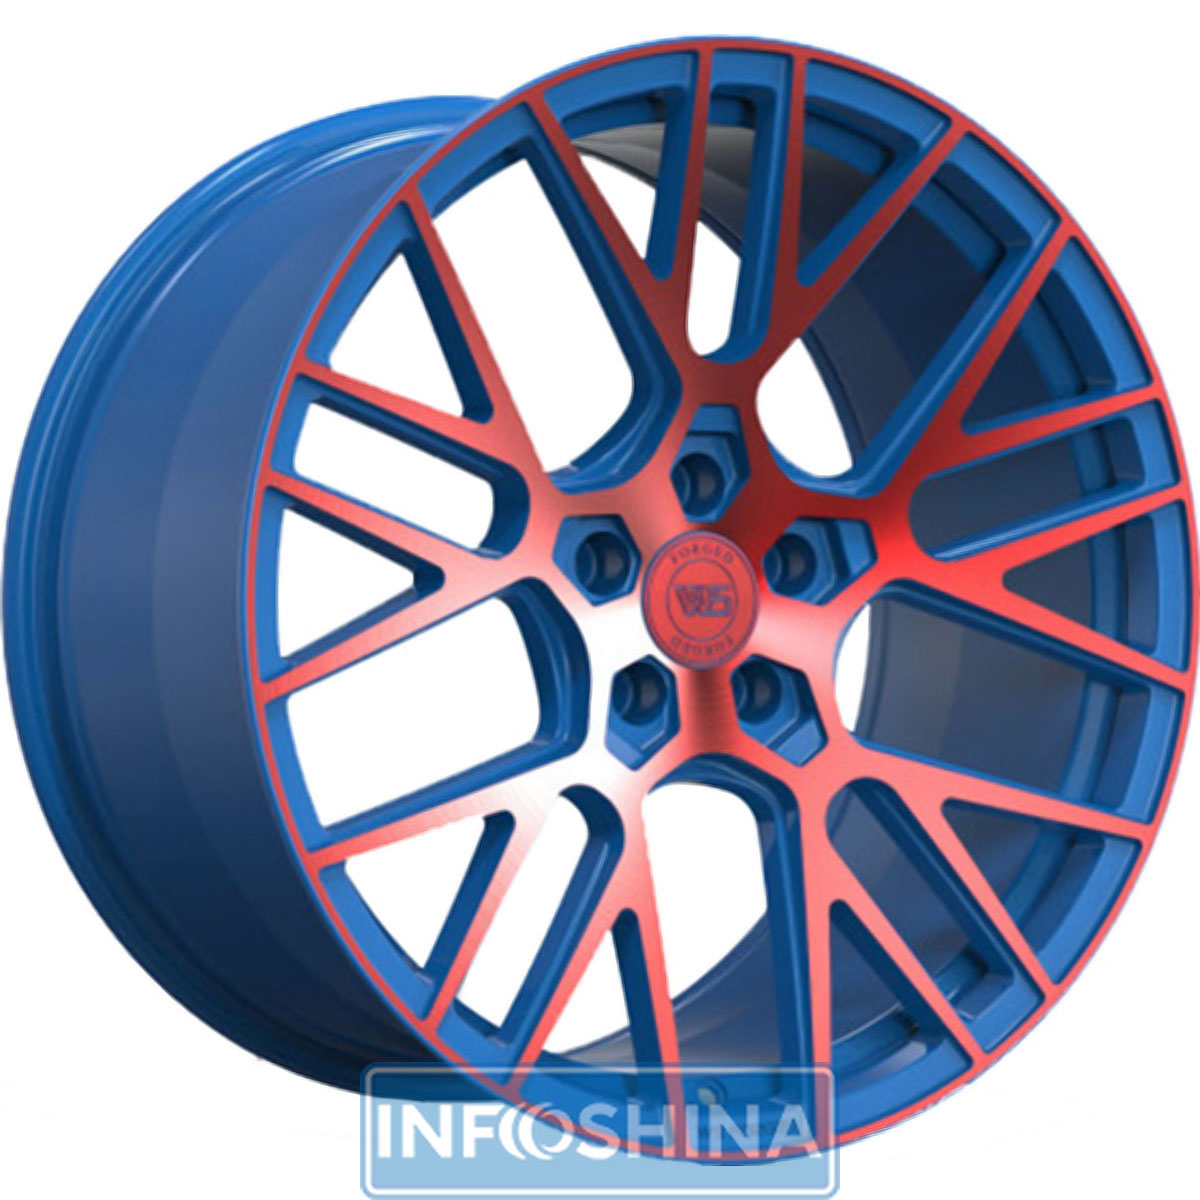 Купить диски WS Forged WS2106 Matte Blue With Red Face R20 W9.5 PCD5x114.3 ET30 DIA70.5